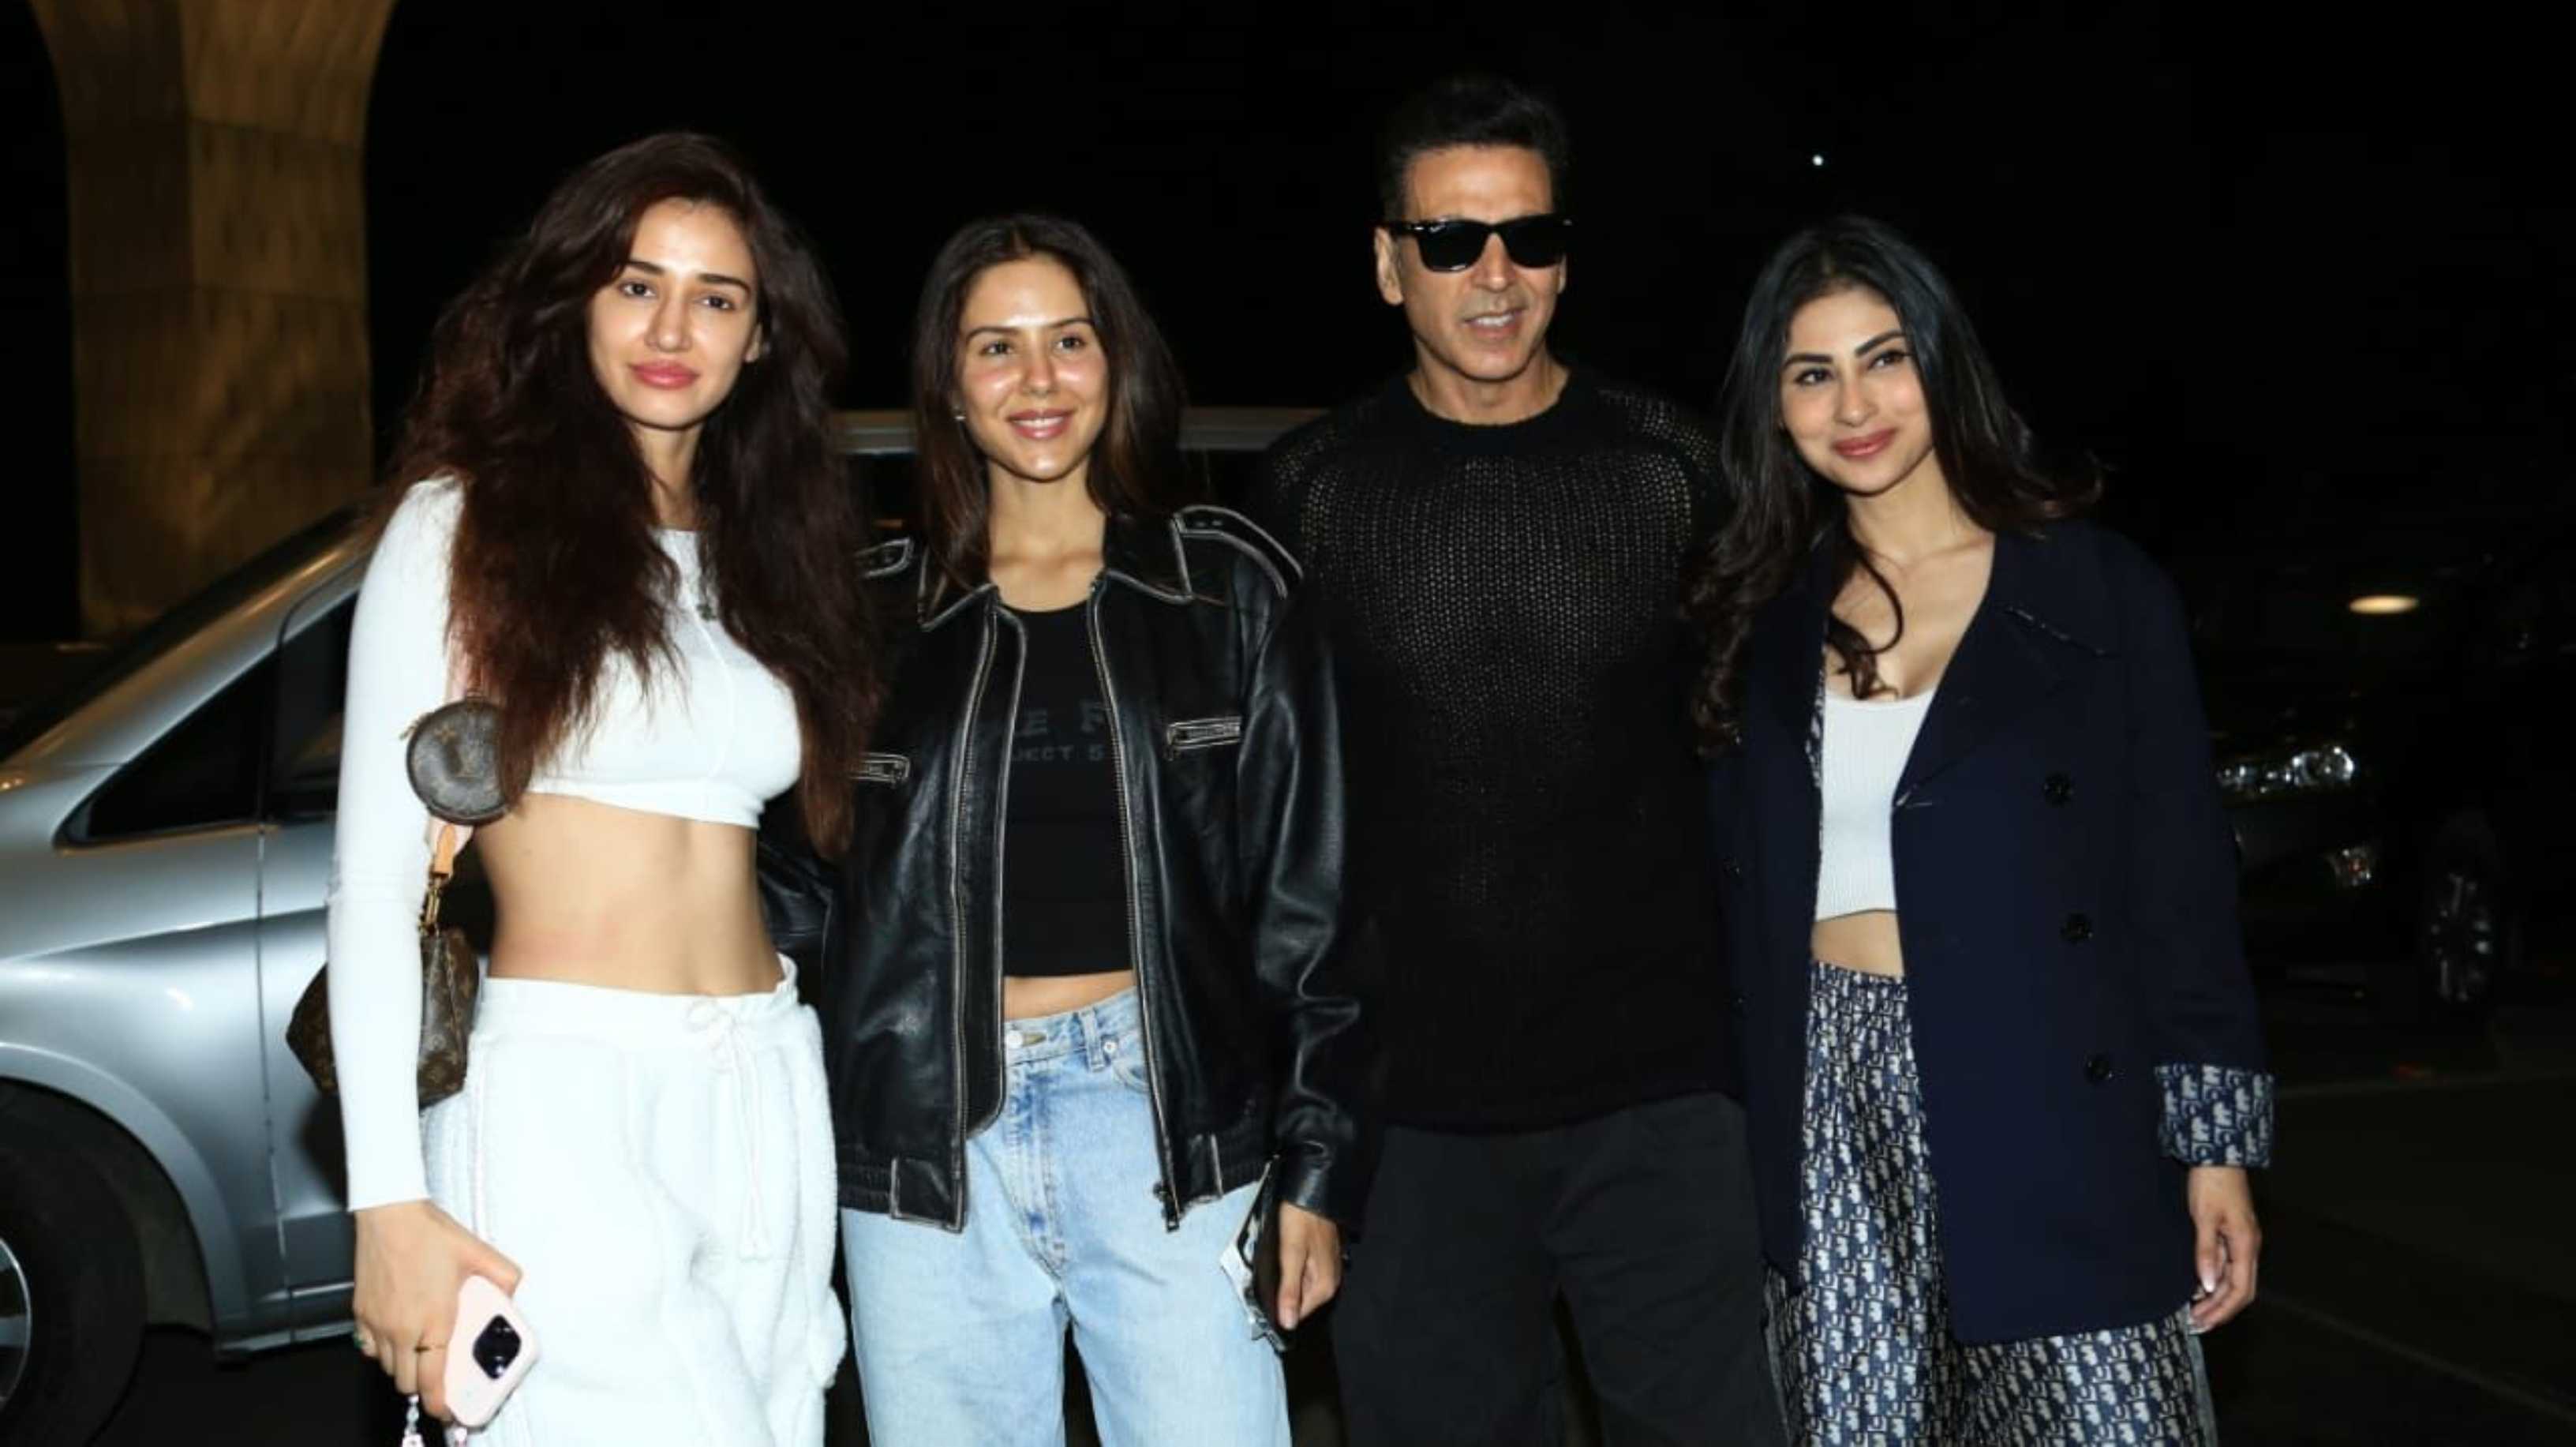 Akshay Kumar, Sonam Bajwa, Disha Patani and Mouni Roy are all smiles as they jet off for The Entertainers tour